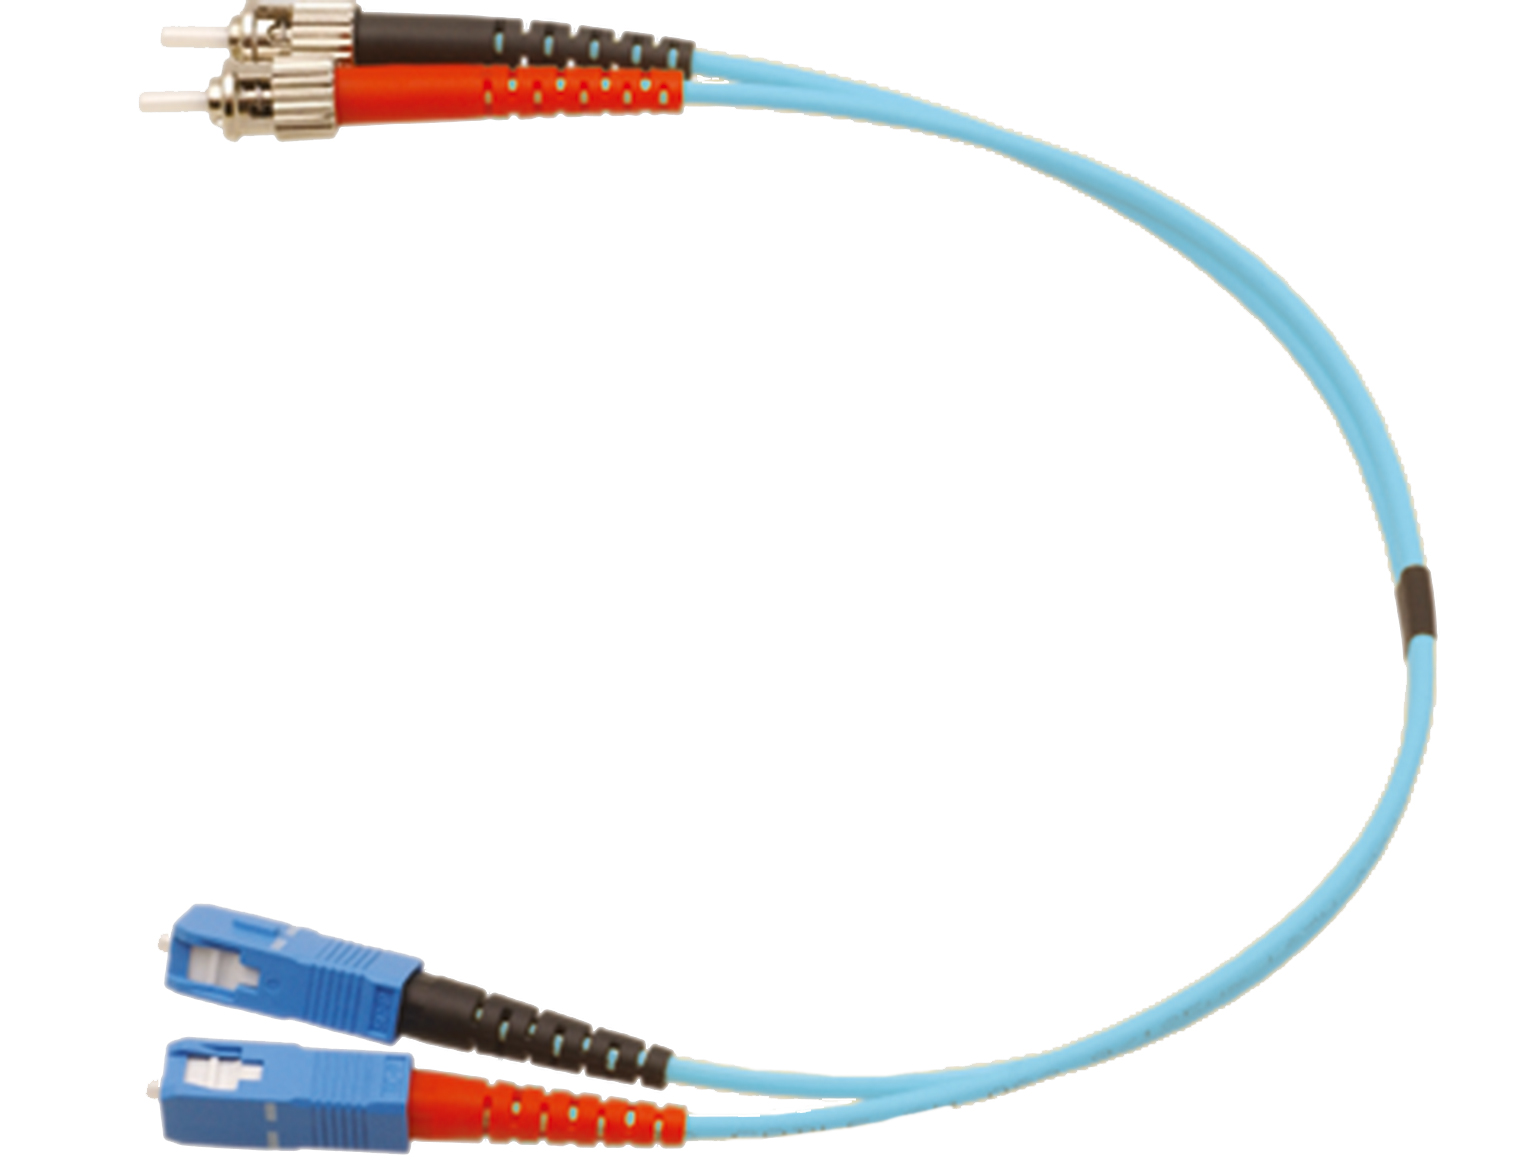 HELUCOM-CONNECTING-SYSTEMS-Jumper-cable-I-VH-2x1-SC-ST-M803163